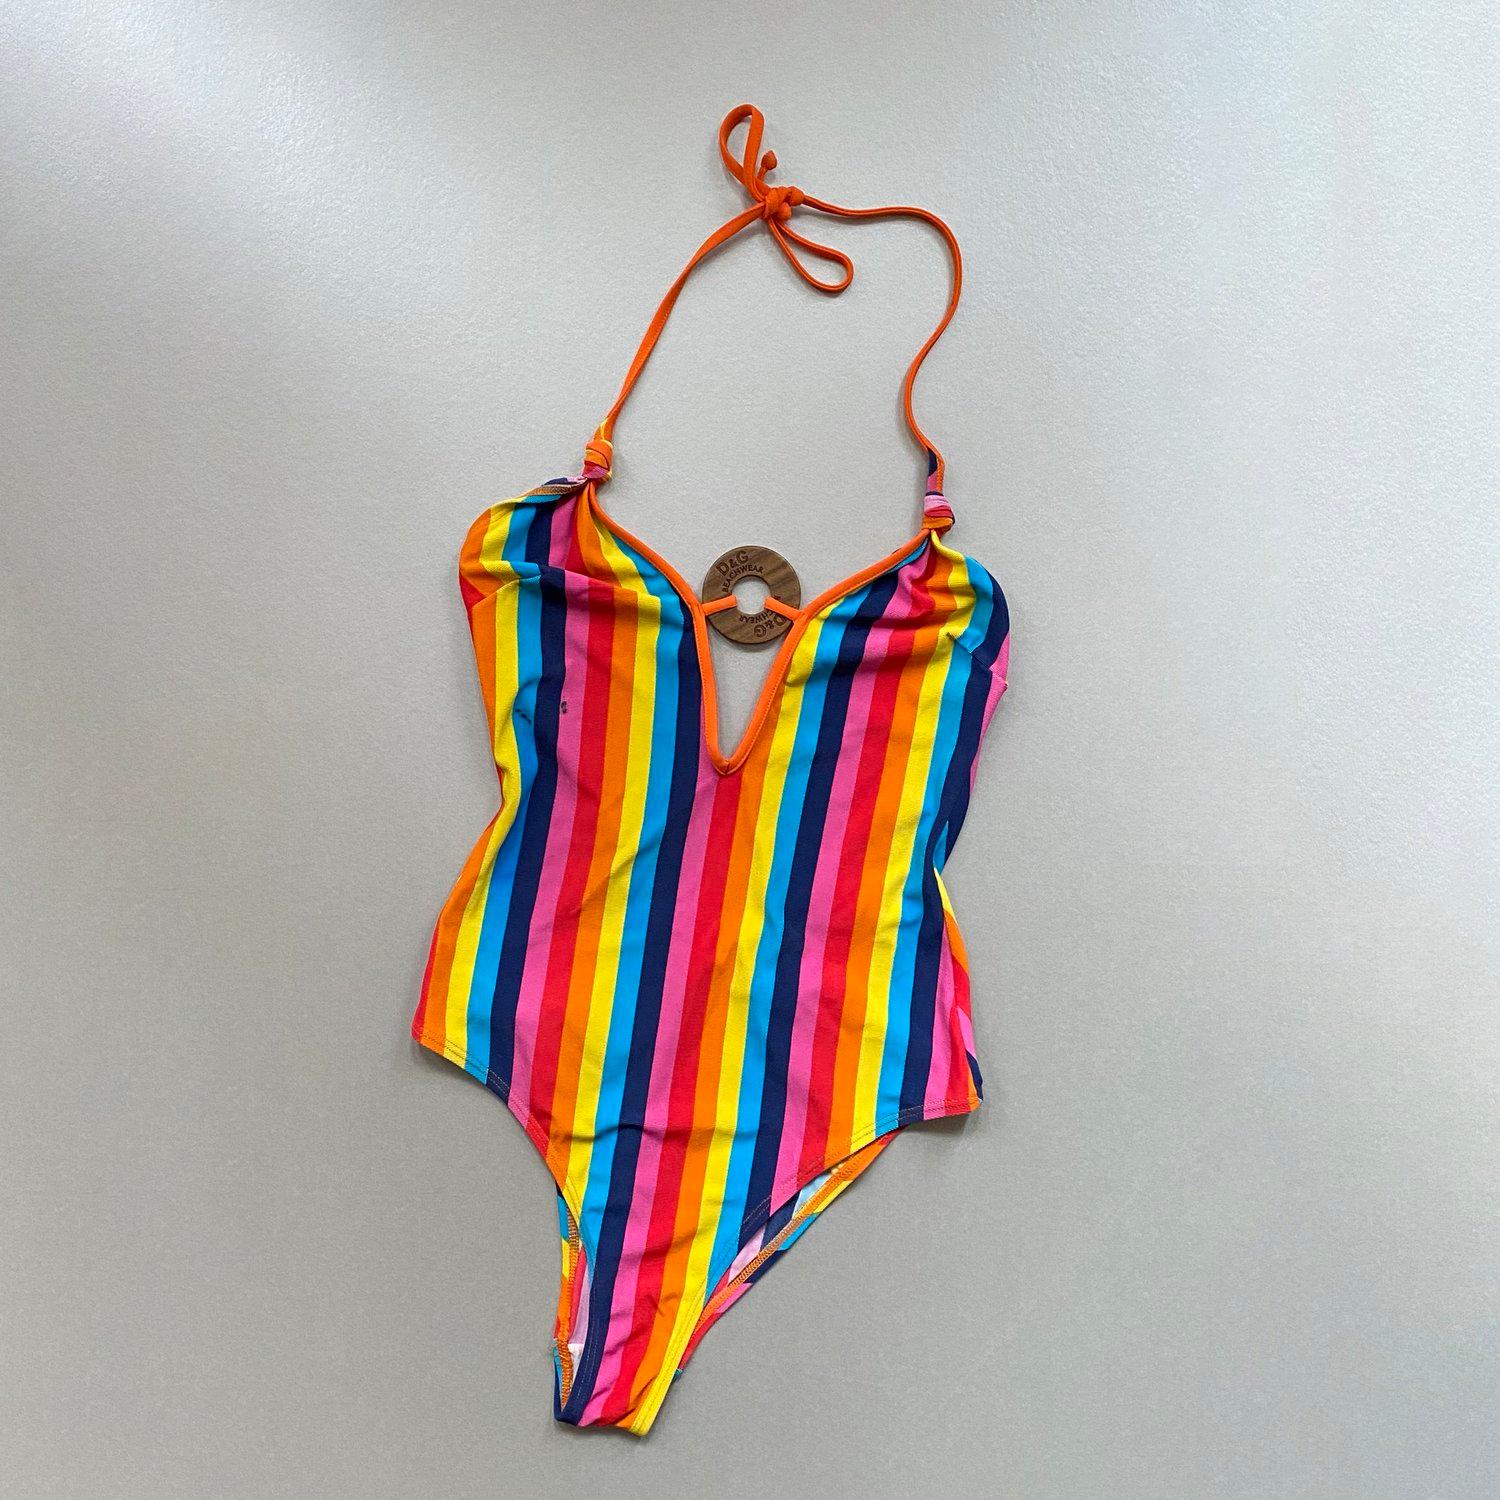 Vintage D&G by Dolce & Gabbana swimsuit. Rainbow stripe with wooden D&G circle logo. Halter style with low back. D&G authenticity label to the inner. Similar to the Spring Summer 2002 Dolce & Gabbana runway collection, and produced at the same